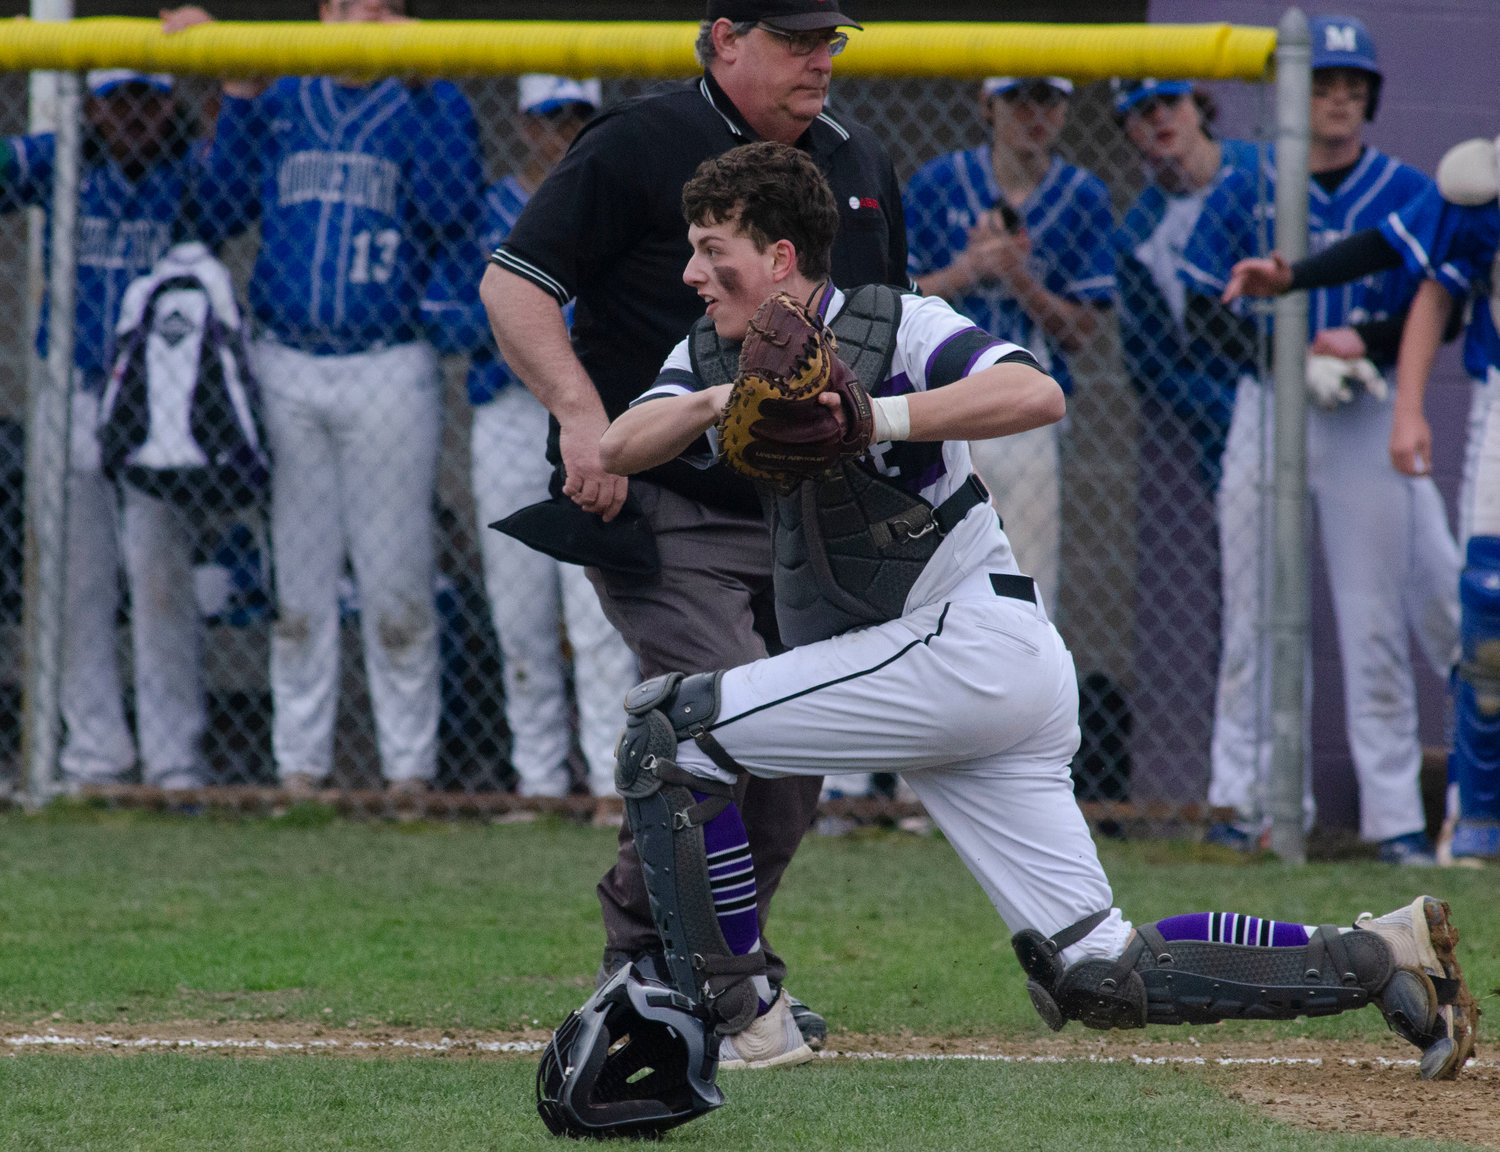 Catcher Matt Gale fields a throw to home plate and looks back a runner at first base. Gale drove in 5 runs in the series with Middletown including the game winner on Saturday.